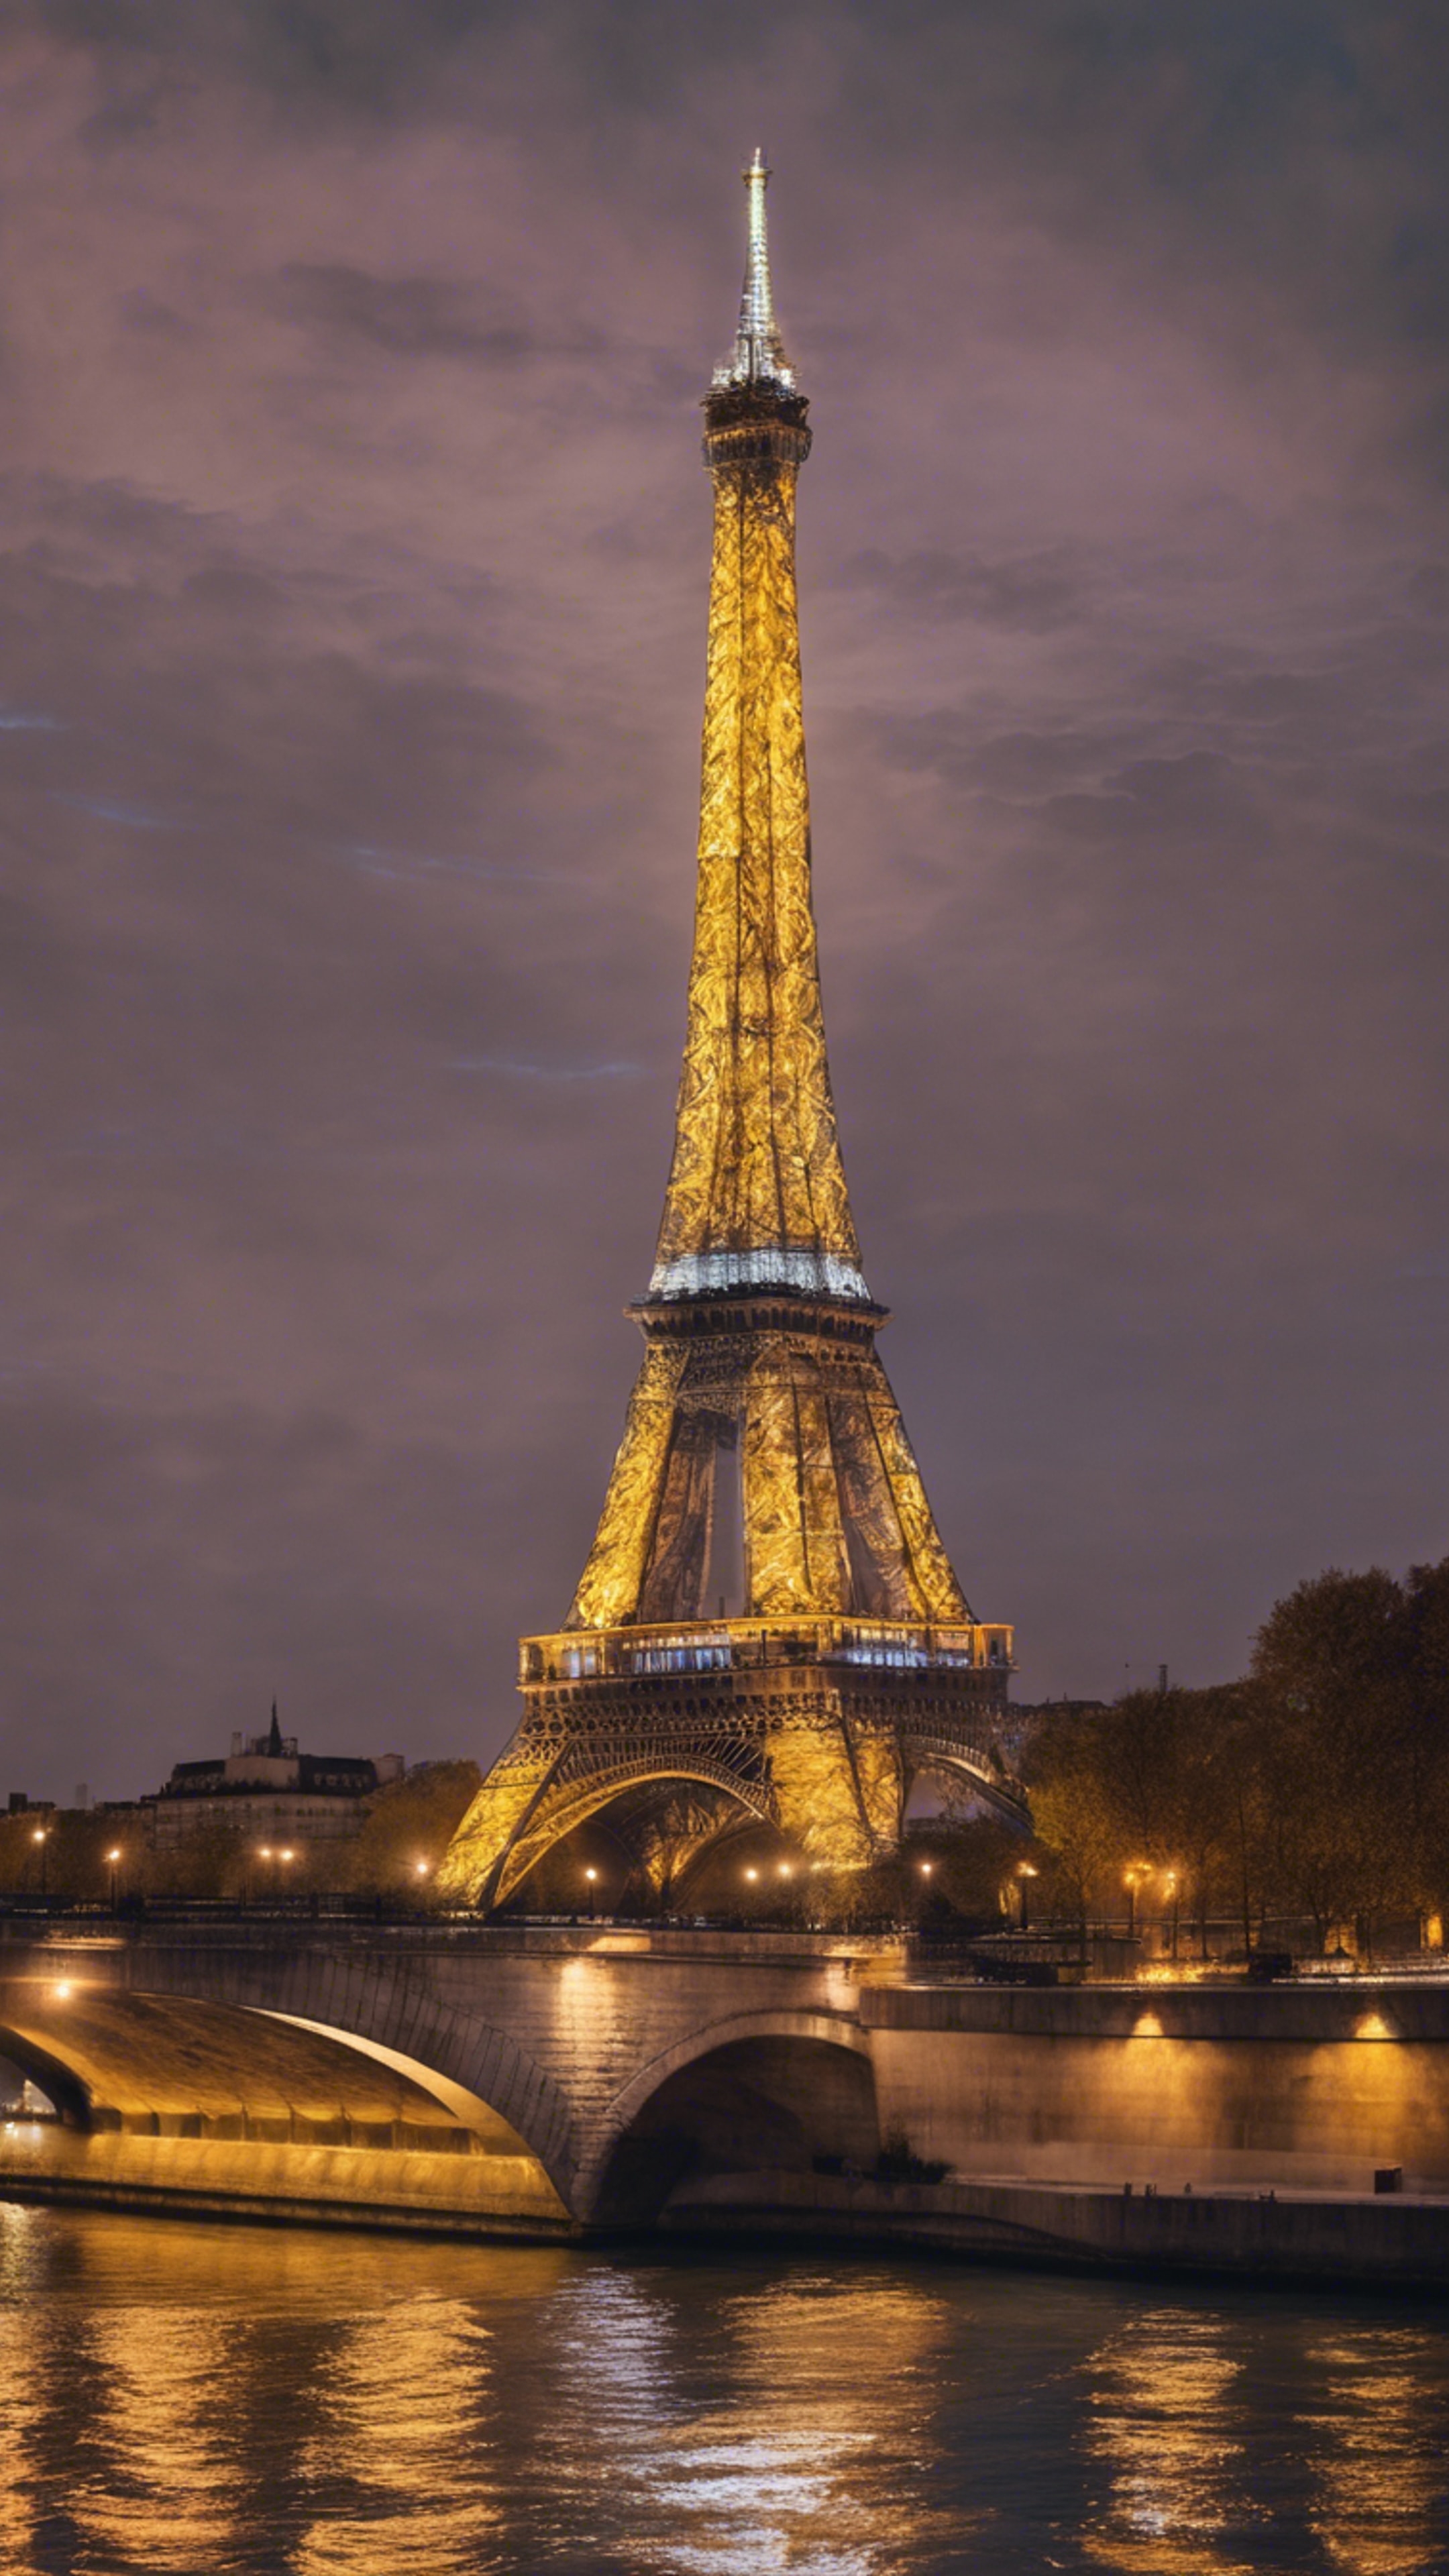 Eiffel tower illuminated against the Paris skyline at night, reflecting in the smooth waters of the river Seine. Tapeta[bfd7e83086d14adeb14c]